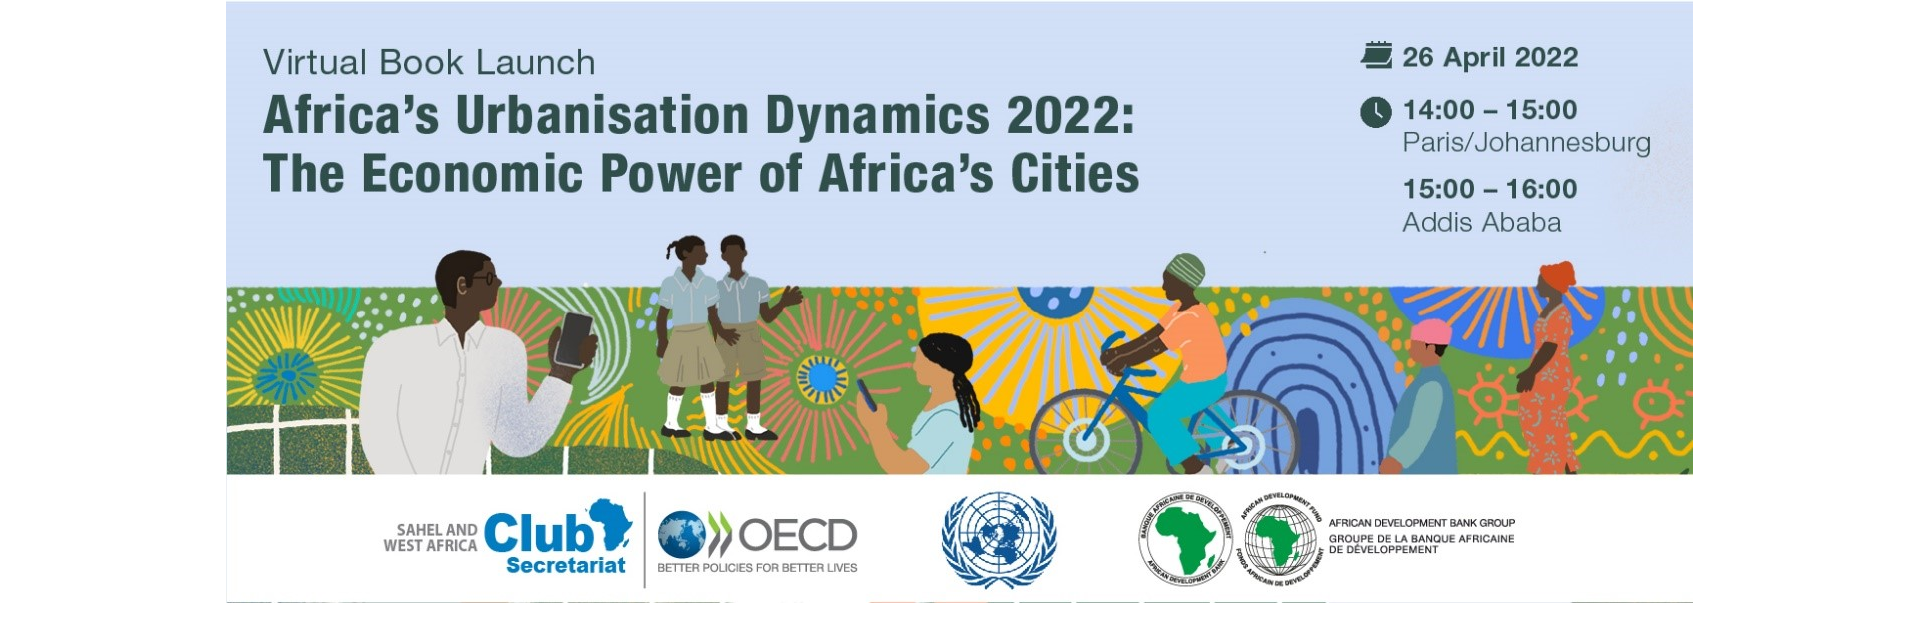 Media Advisory - Launch of the 2022 ‘Africa’s Urbanisation Dynamics: The Economic Power of Africa’s Cities’ report